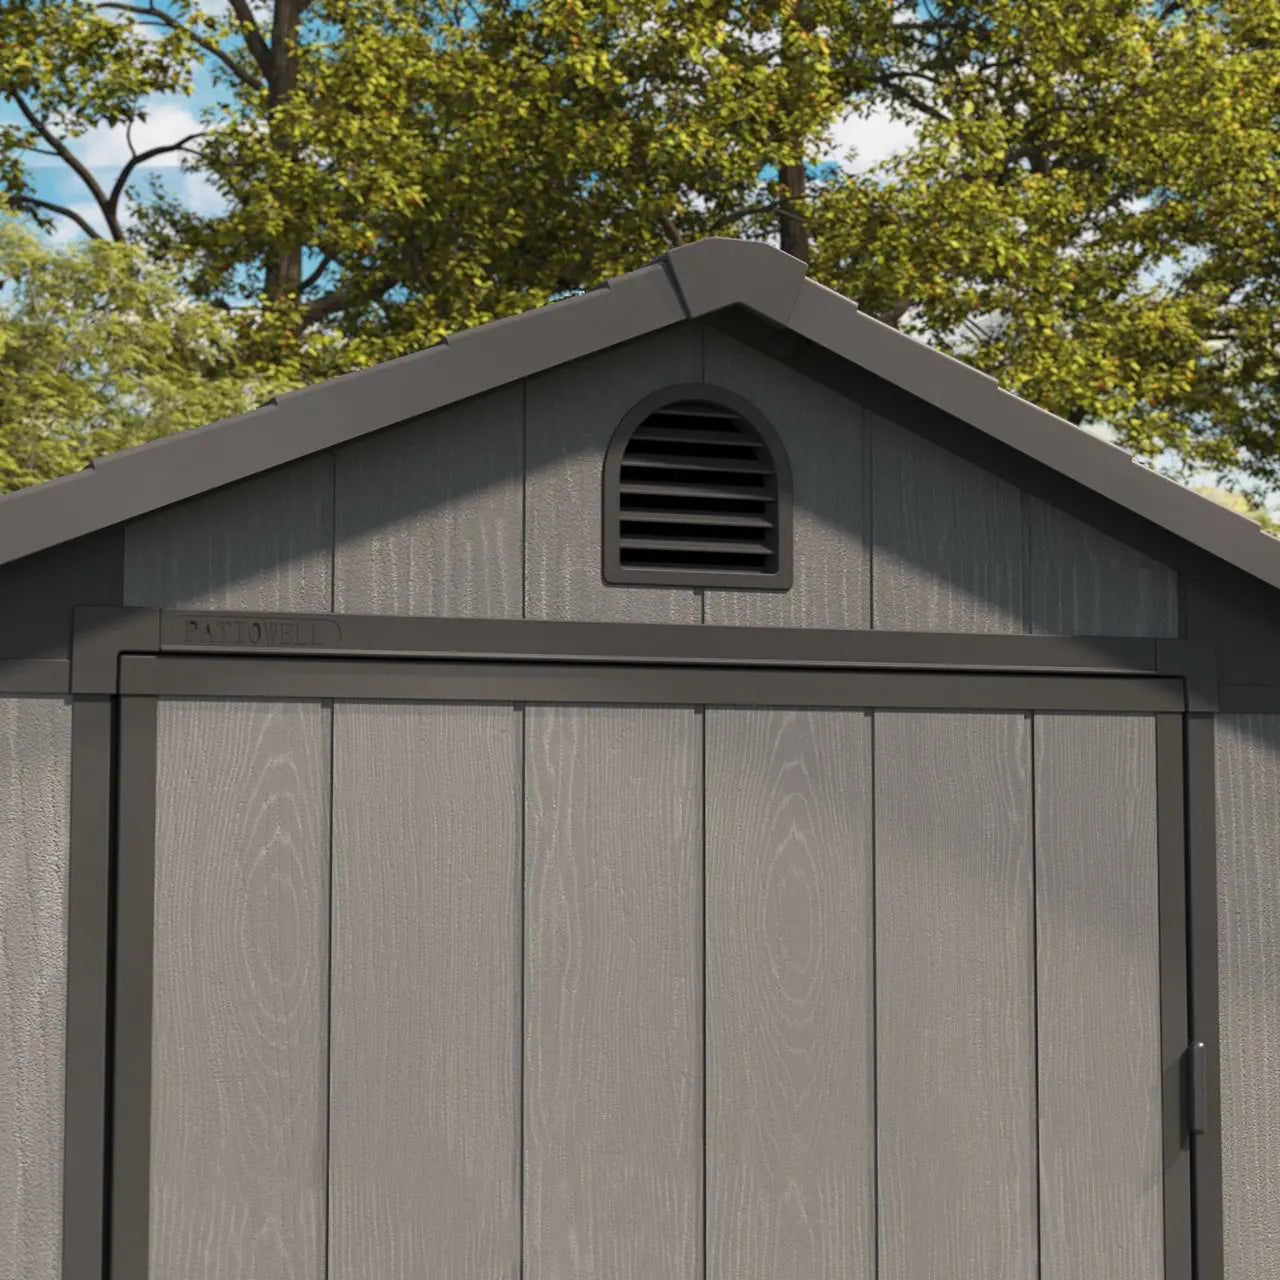 Patiowell 4x6 Plastic Storage Shed-Air Vents